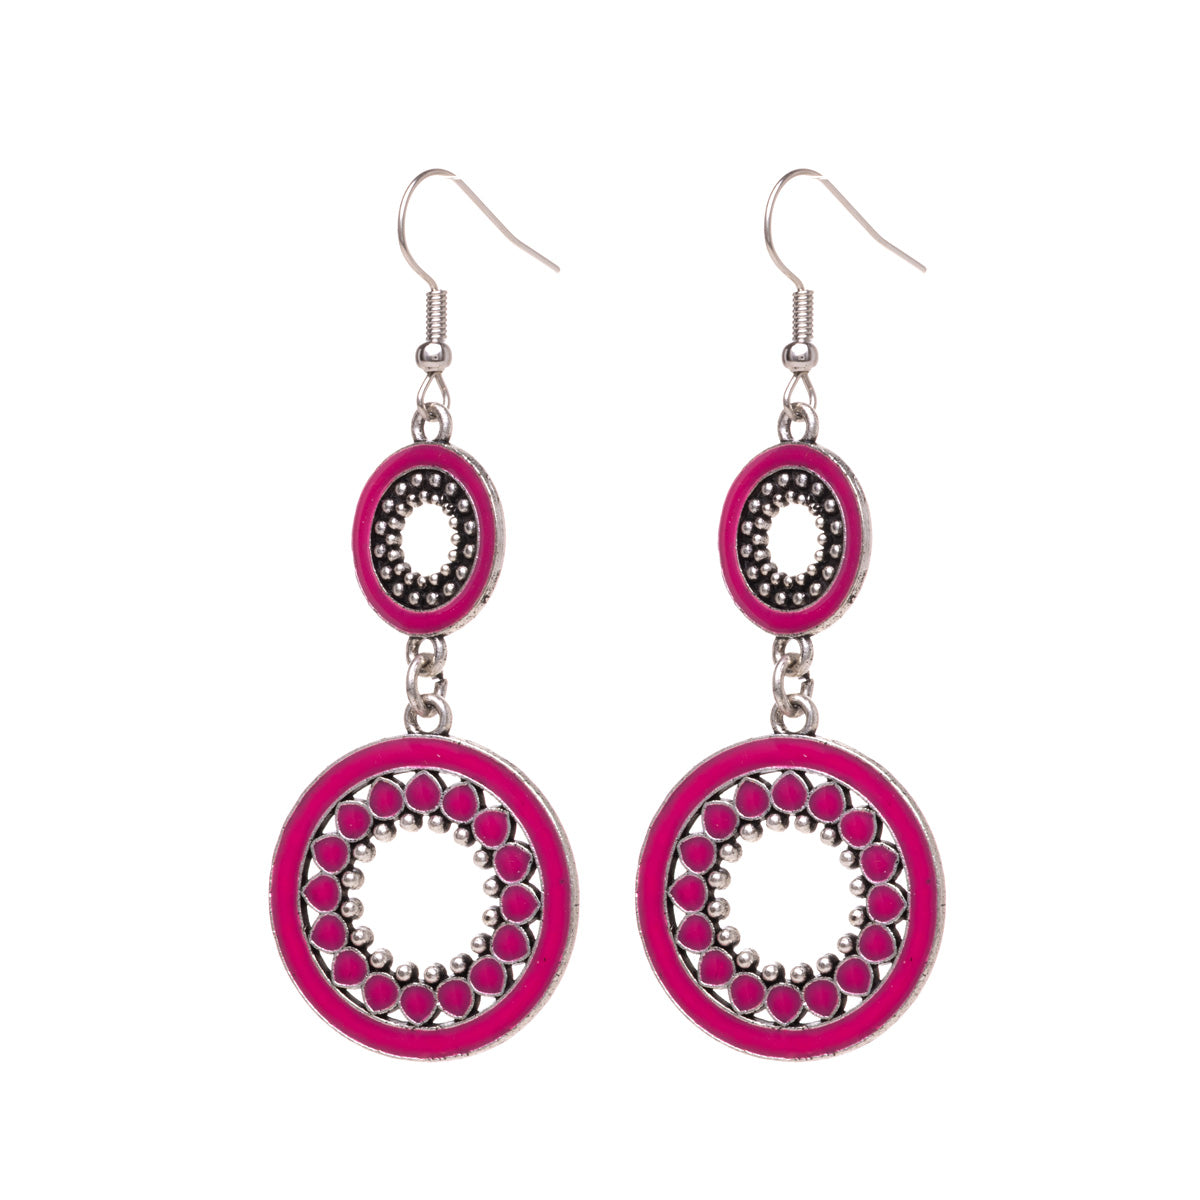 Coloured hanging renngas earrings